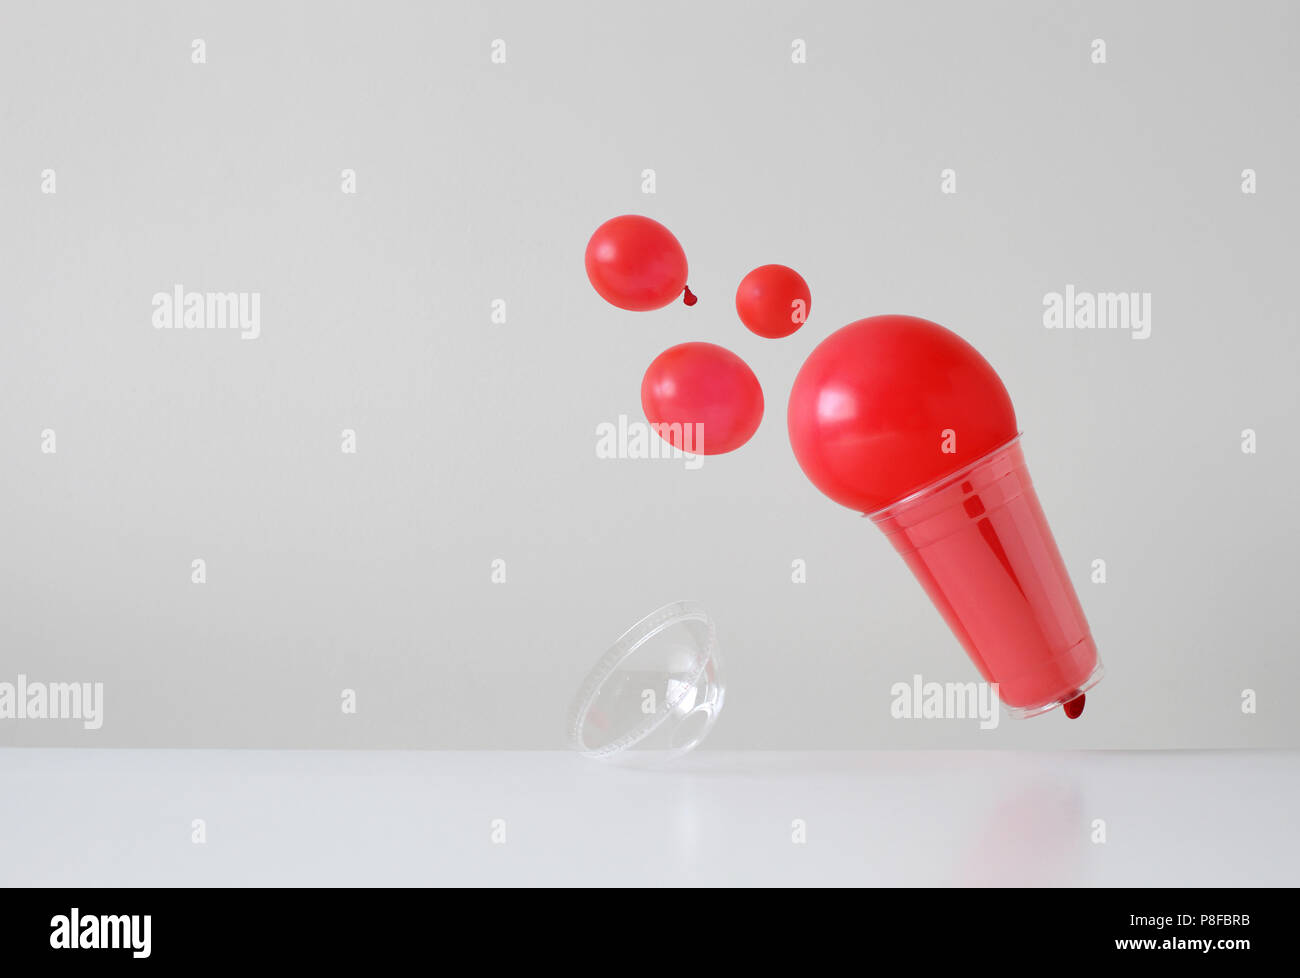 Conceptual slush drink spilling out of a plastic disposable cup Stock Photo